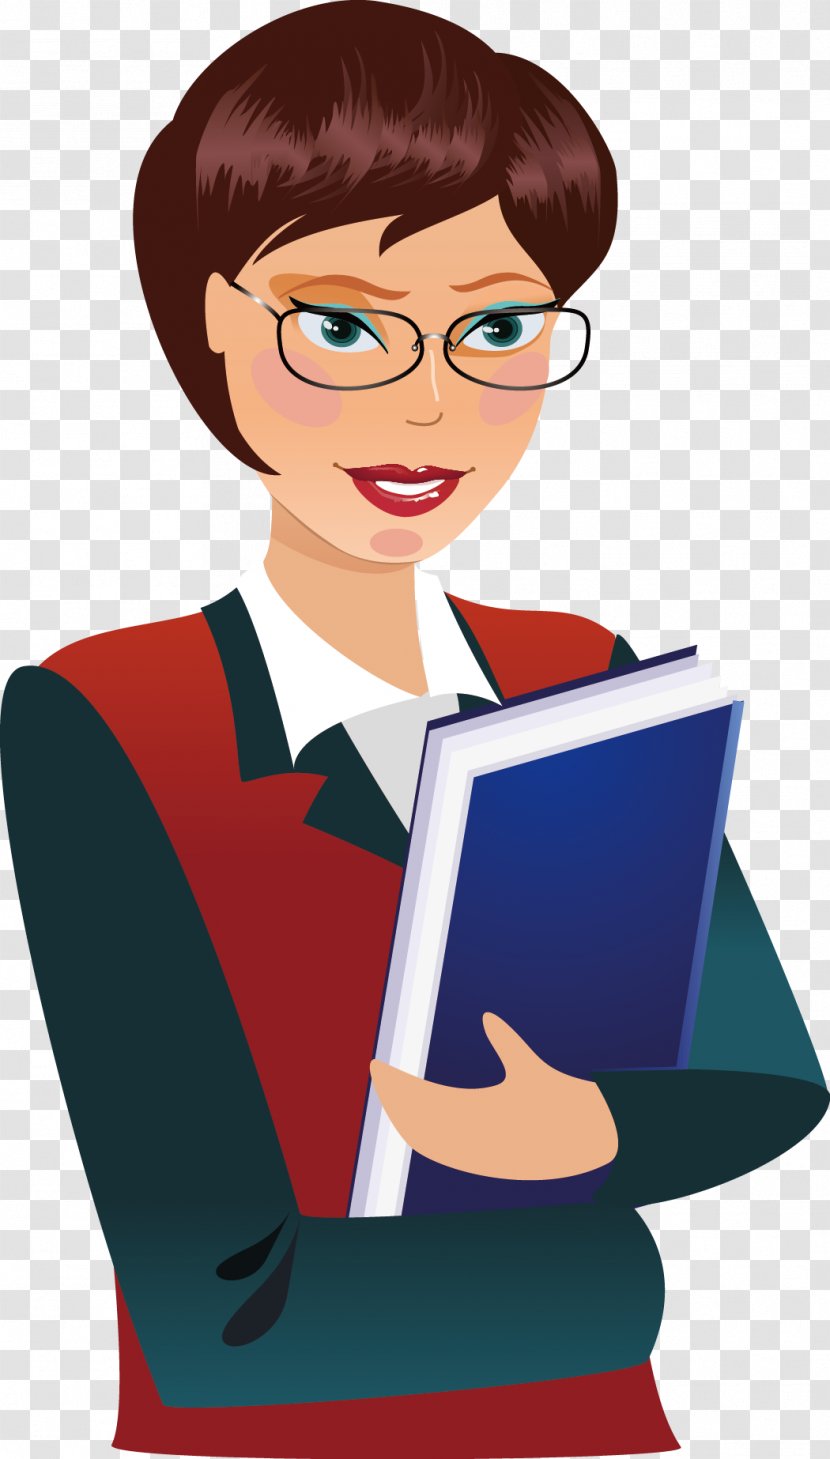 Advertising Computer File - Flower - Wearing Glasses And Holding Short Hair Girls Transparent PNG